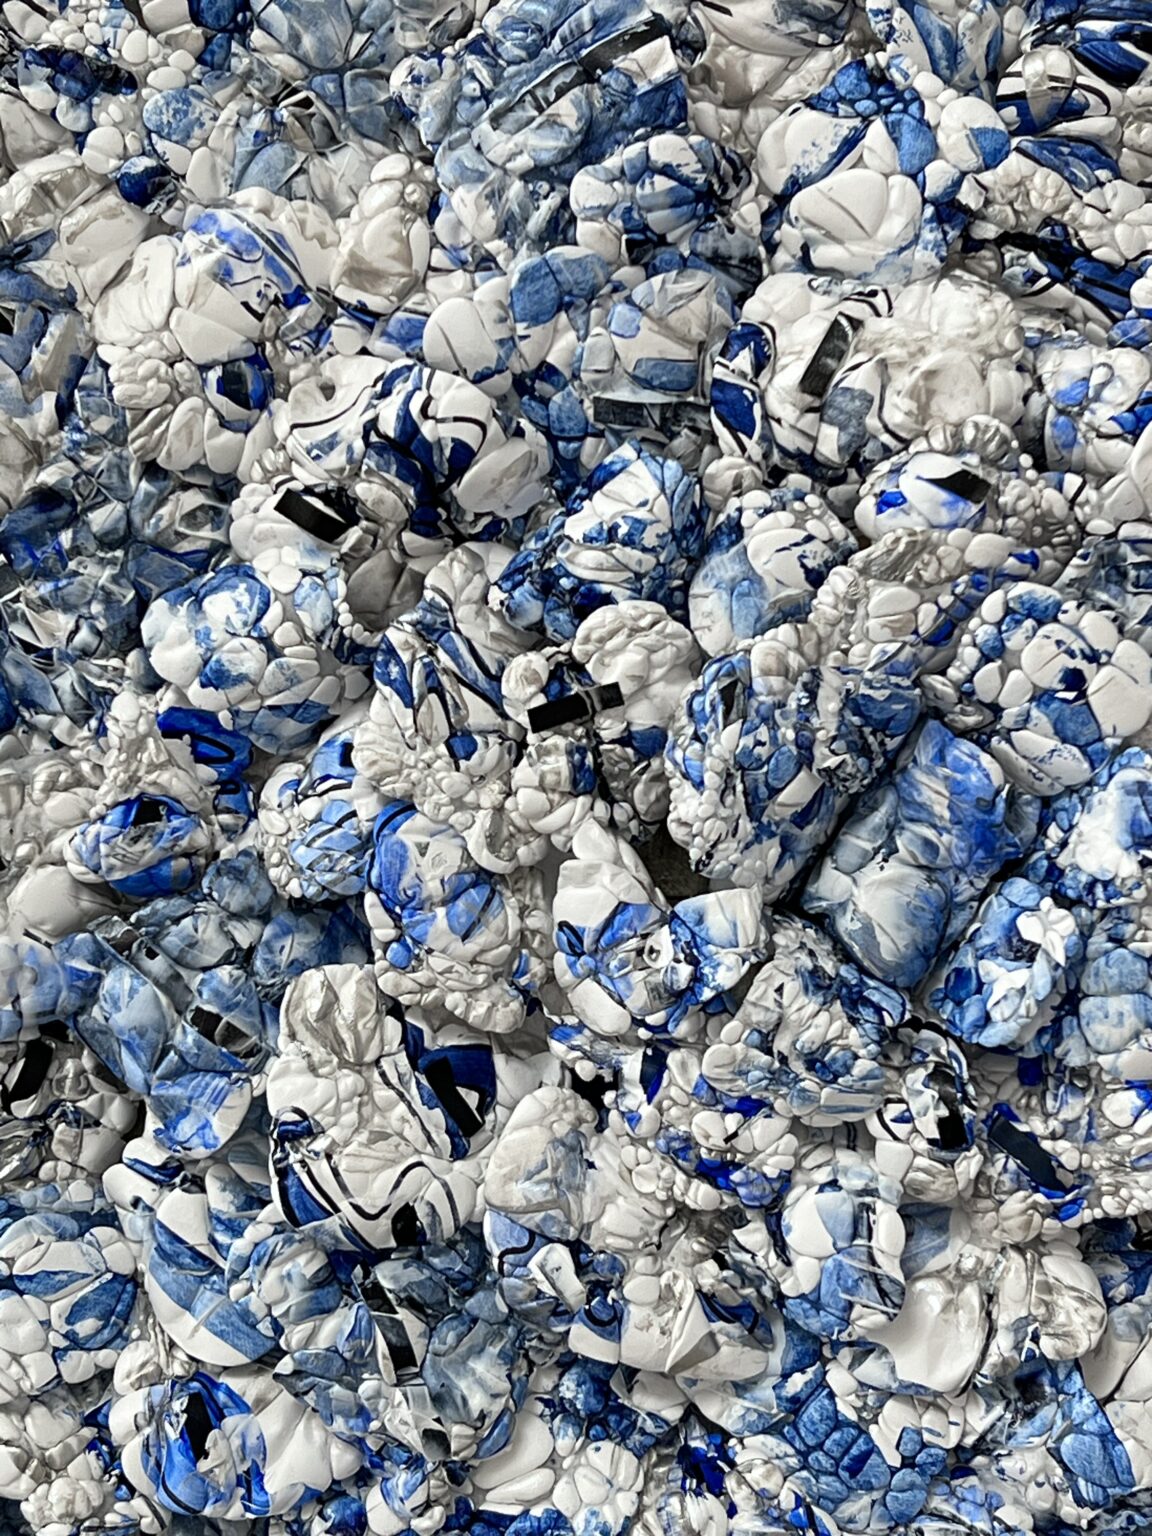 A pile of crushed cans in blue and white.